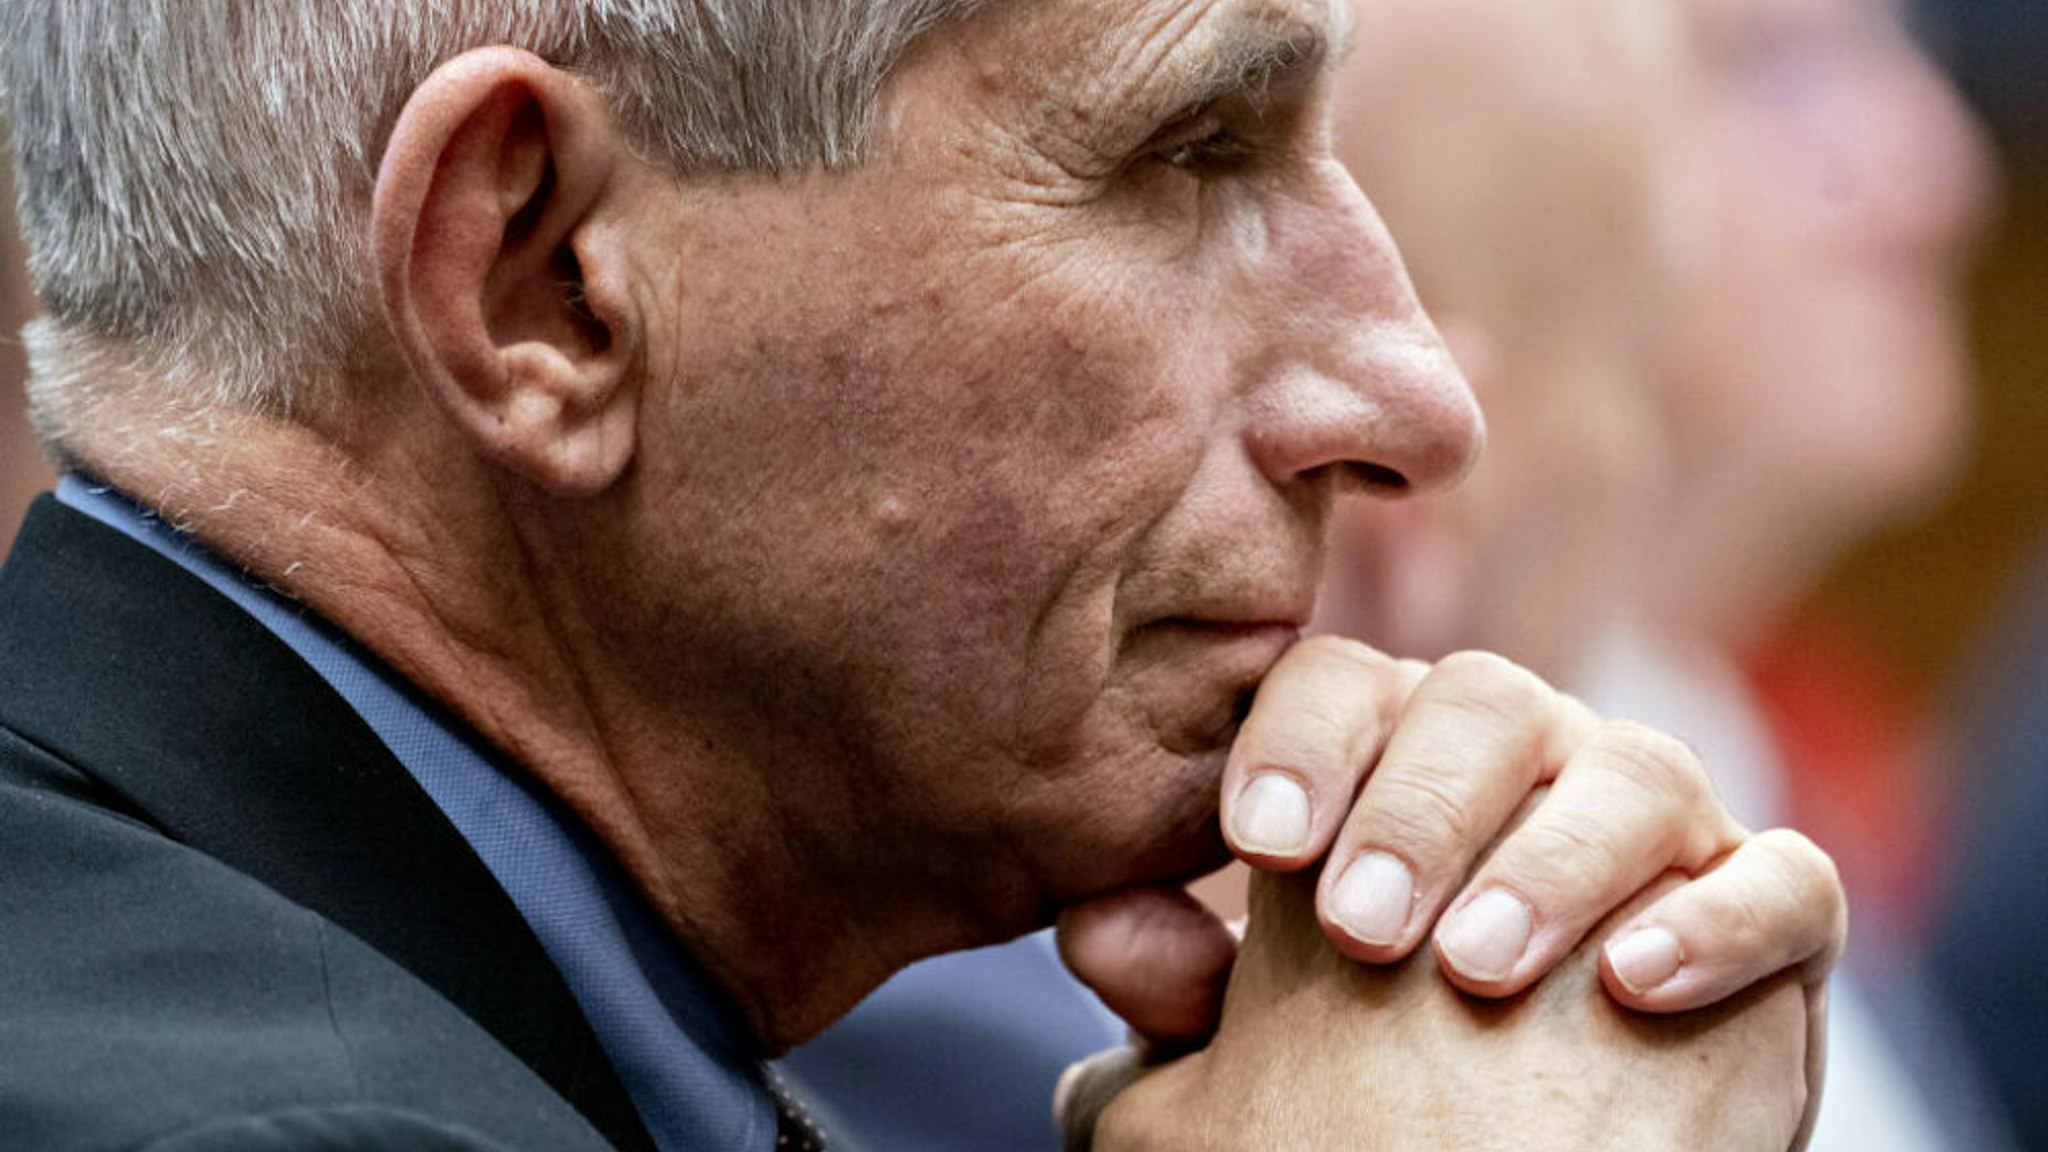 Anthony Fauci, director of the National Institute of Allergy and Infectious Diseases, listens during a House Energy and Commerce Subcommittee on Health hearing in Washington, D.C., U.S., on Wednesday, Feb. 26, 2020. Top U.S. health officials described a range of measures the government could take if the outbreak of coronavirus that began in China spreads widely in the U.S., outlining emergency plans that could result in significant disruptions to daily life for some.